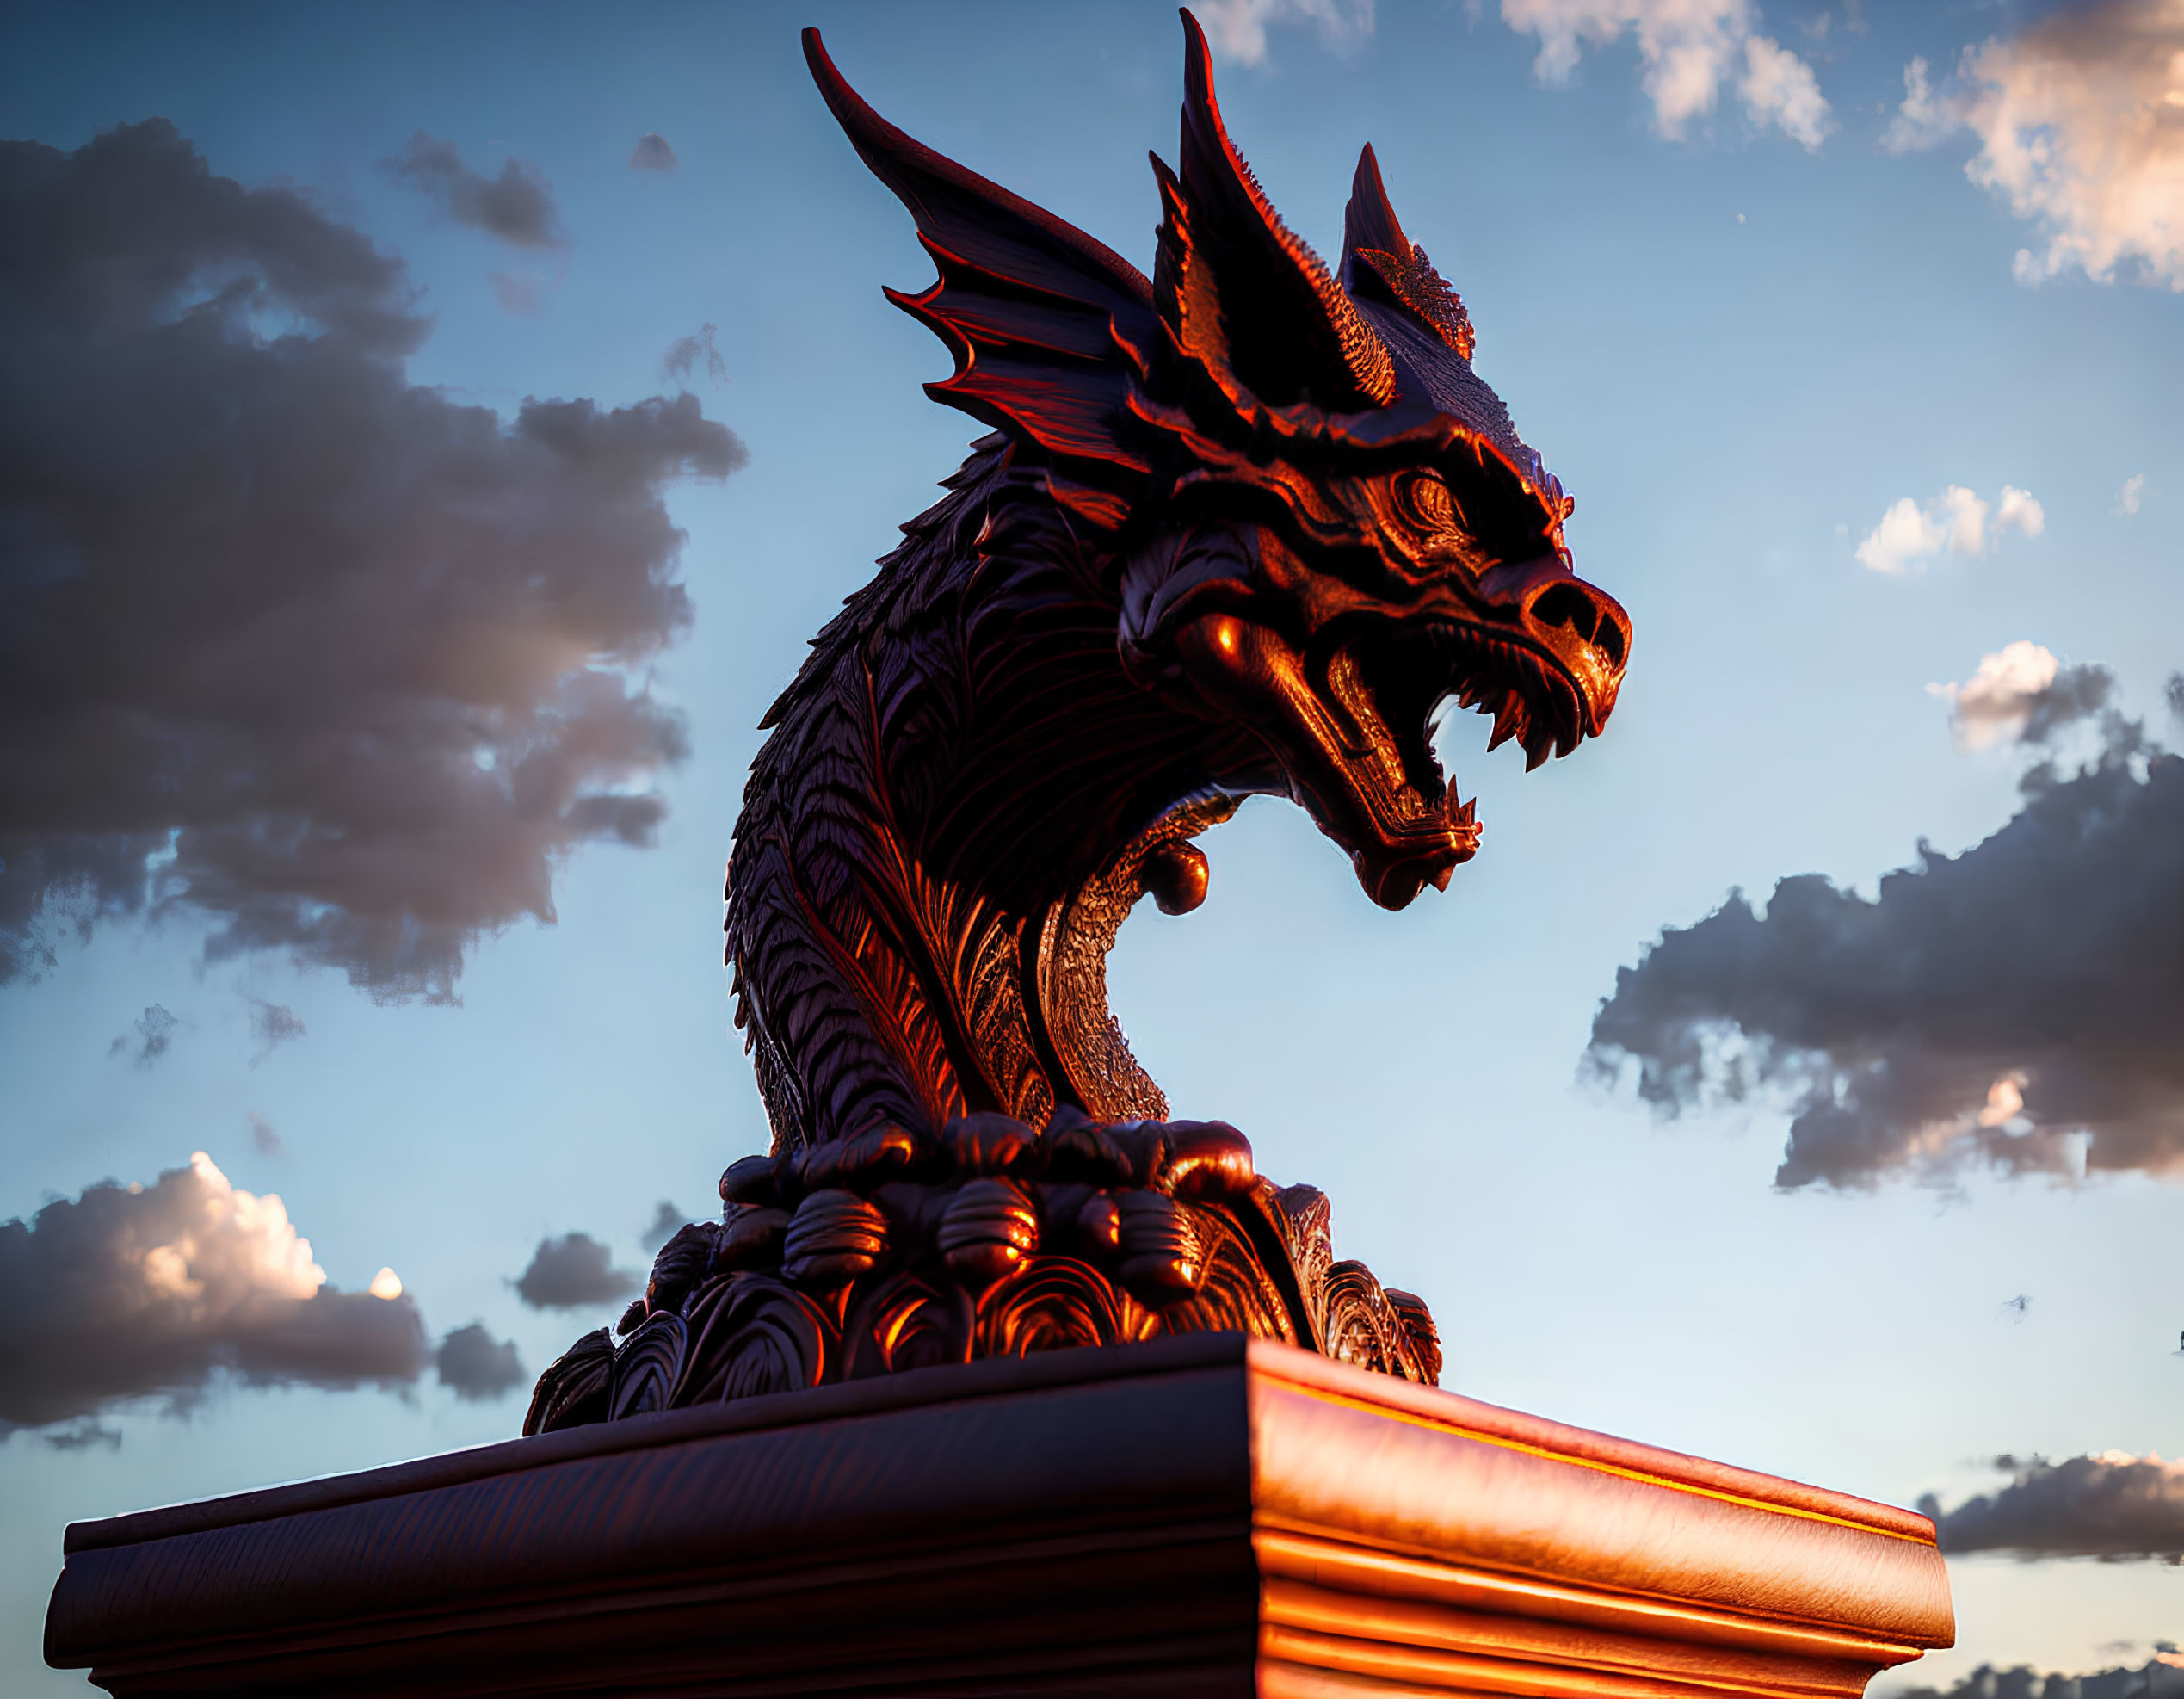 Majestic dragon sculpture at sunset with dramatic lighting